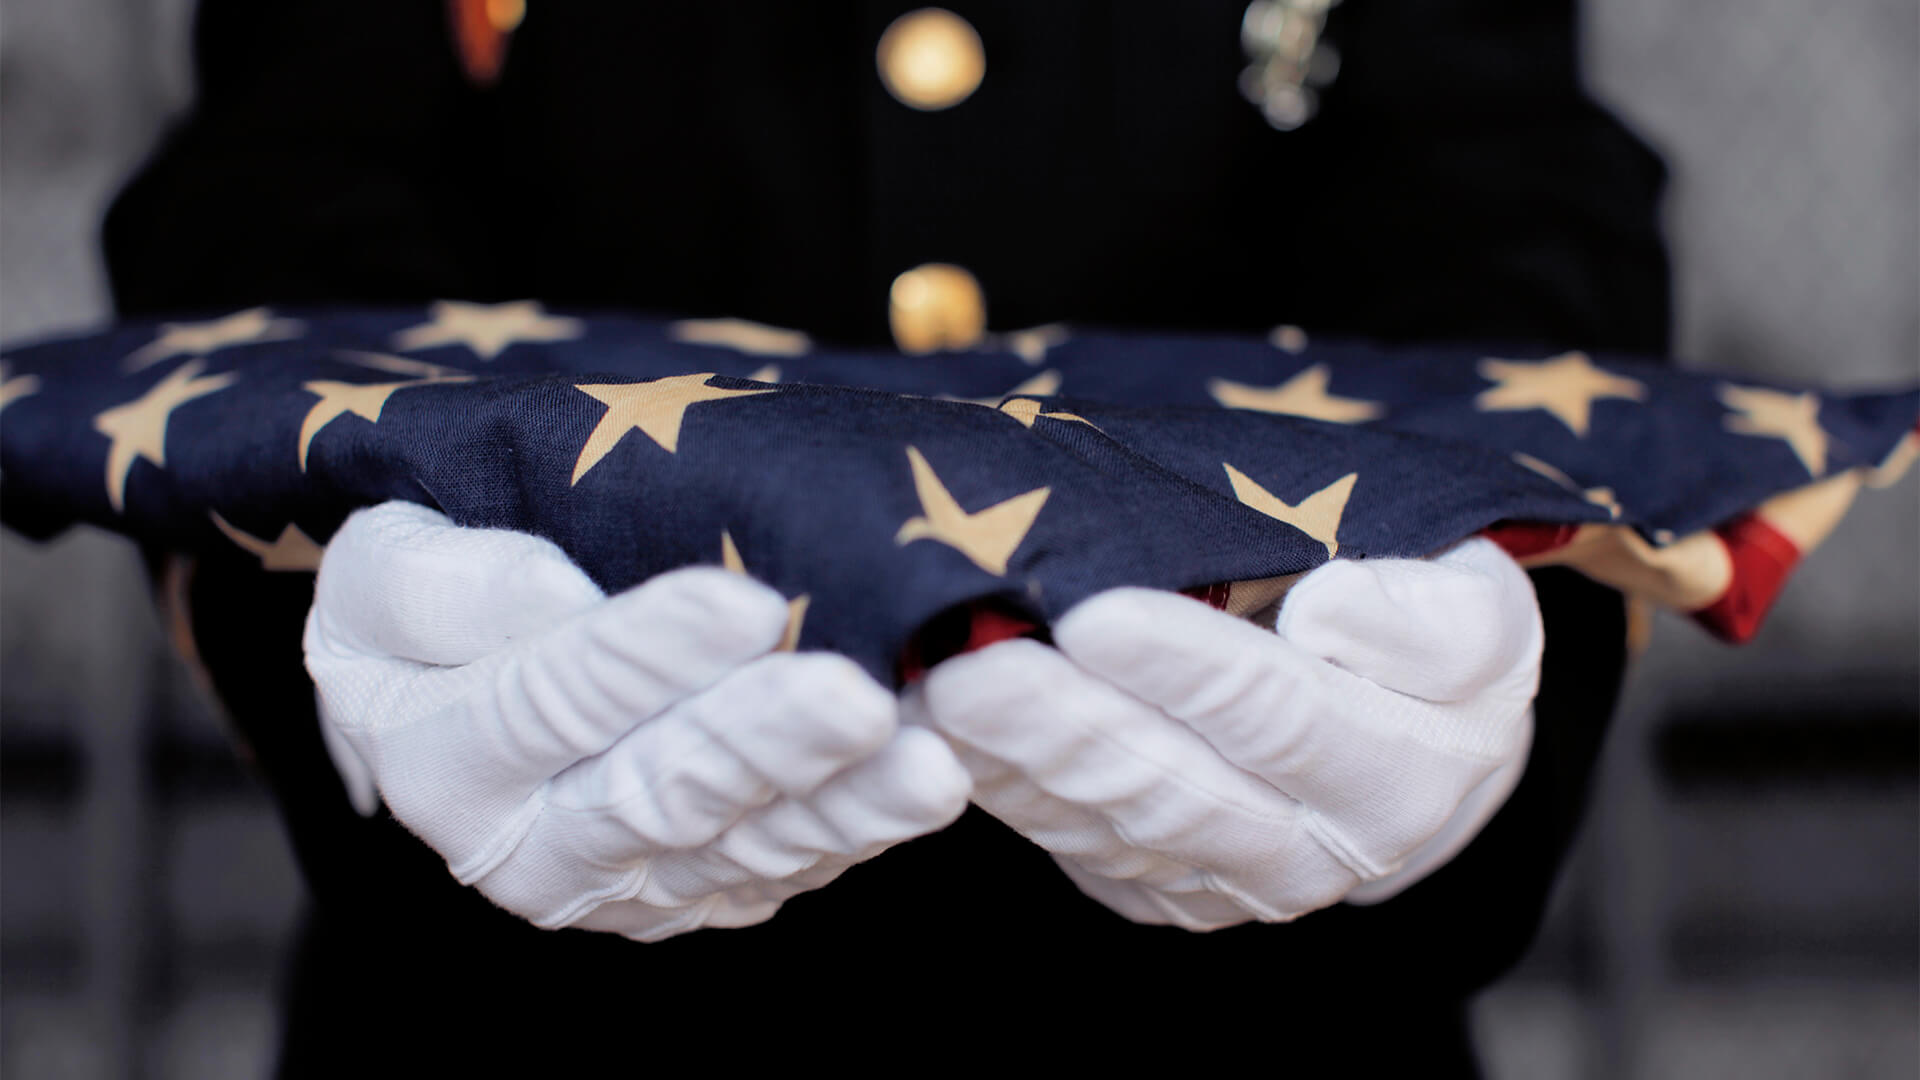 Blurred Veteran Funeral Services image